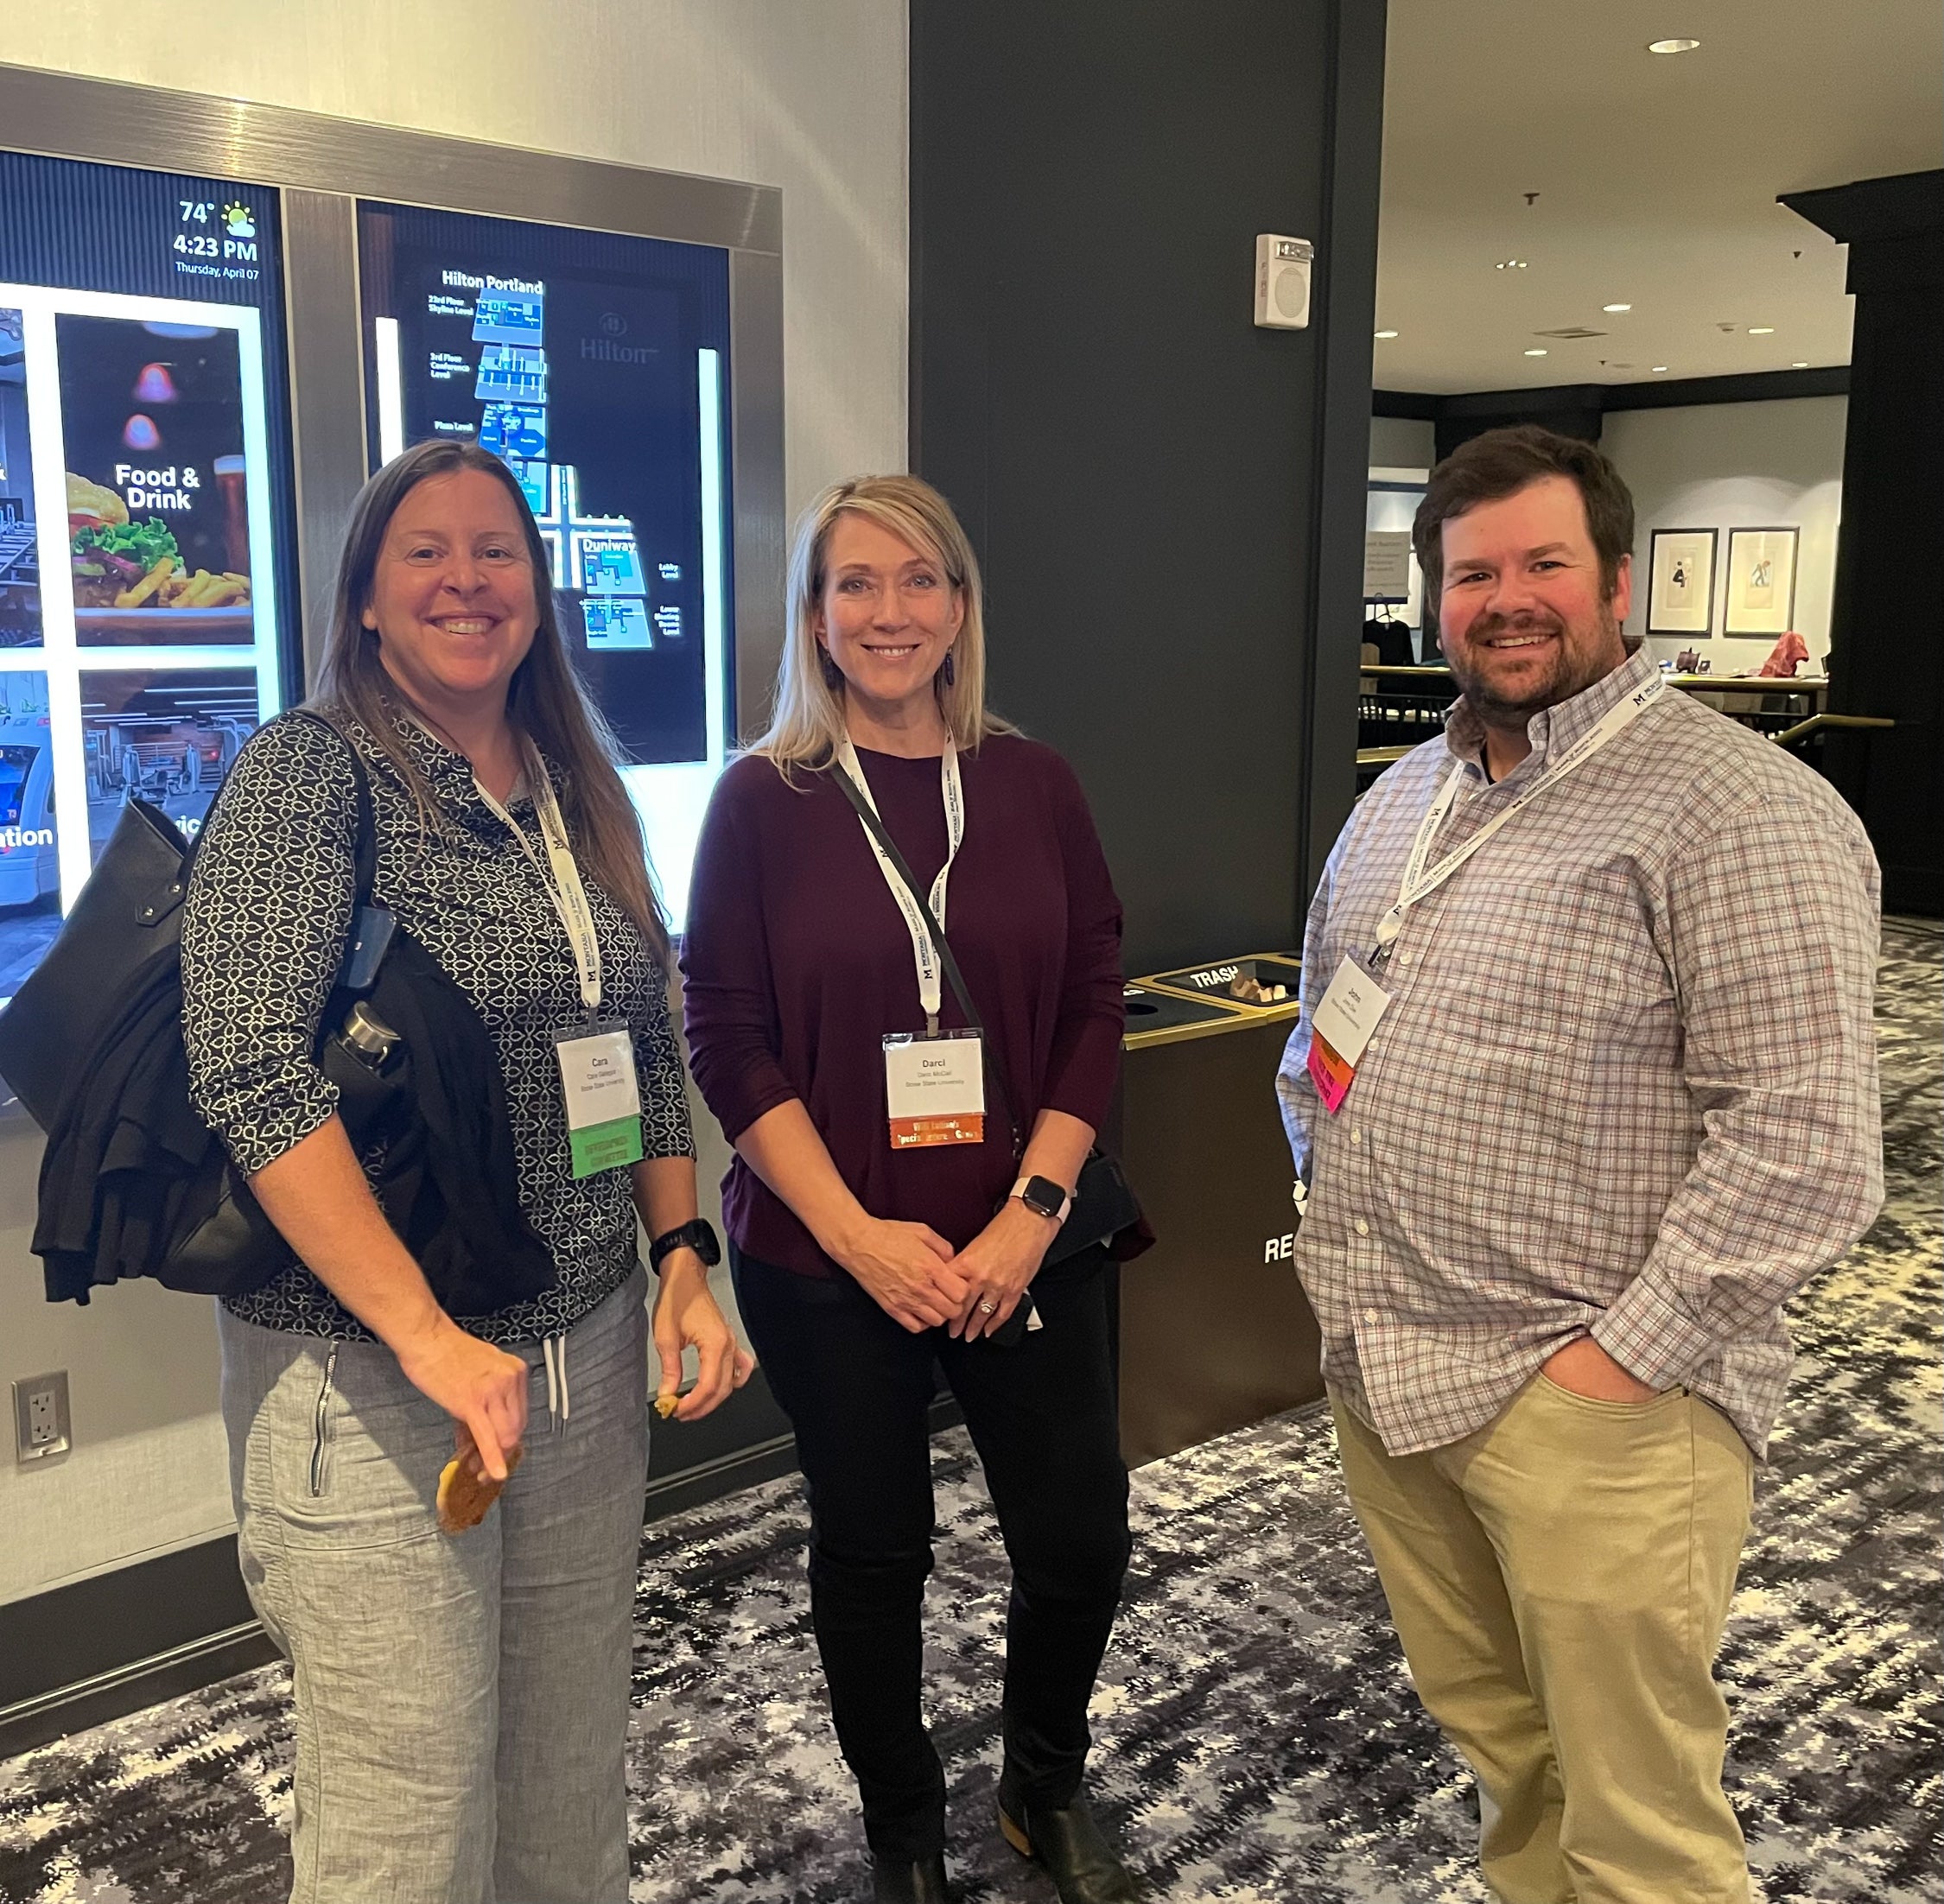 Associate professors Cara Gallegos and Darci McCall stand with nursing student John Dye at the 2022 Western Institute of Nursing conference.